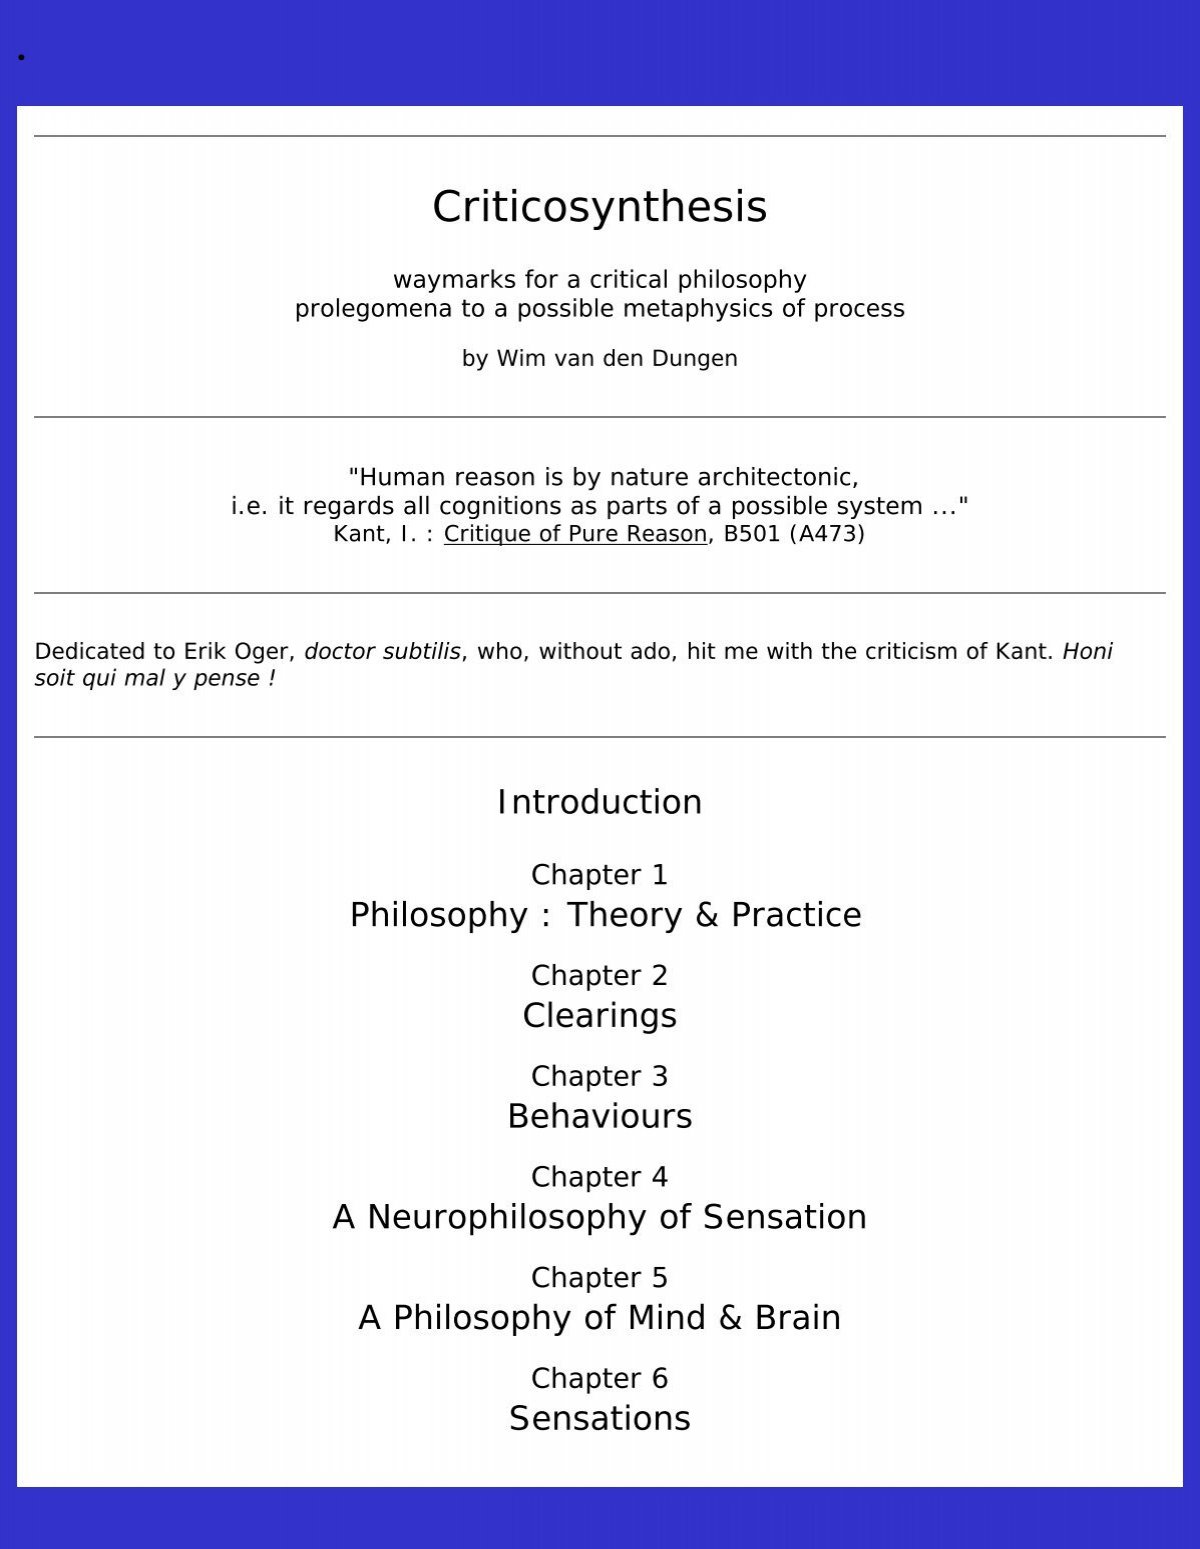 PHILOSOPHY : Criticosynthesis : Waymarks for a  - SOFIATOPIA